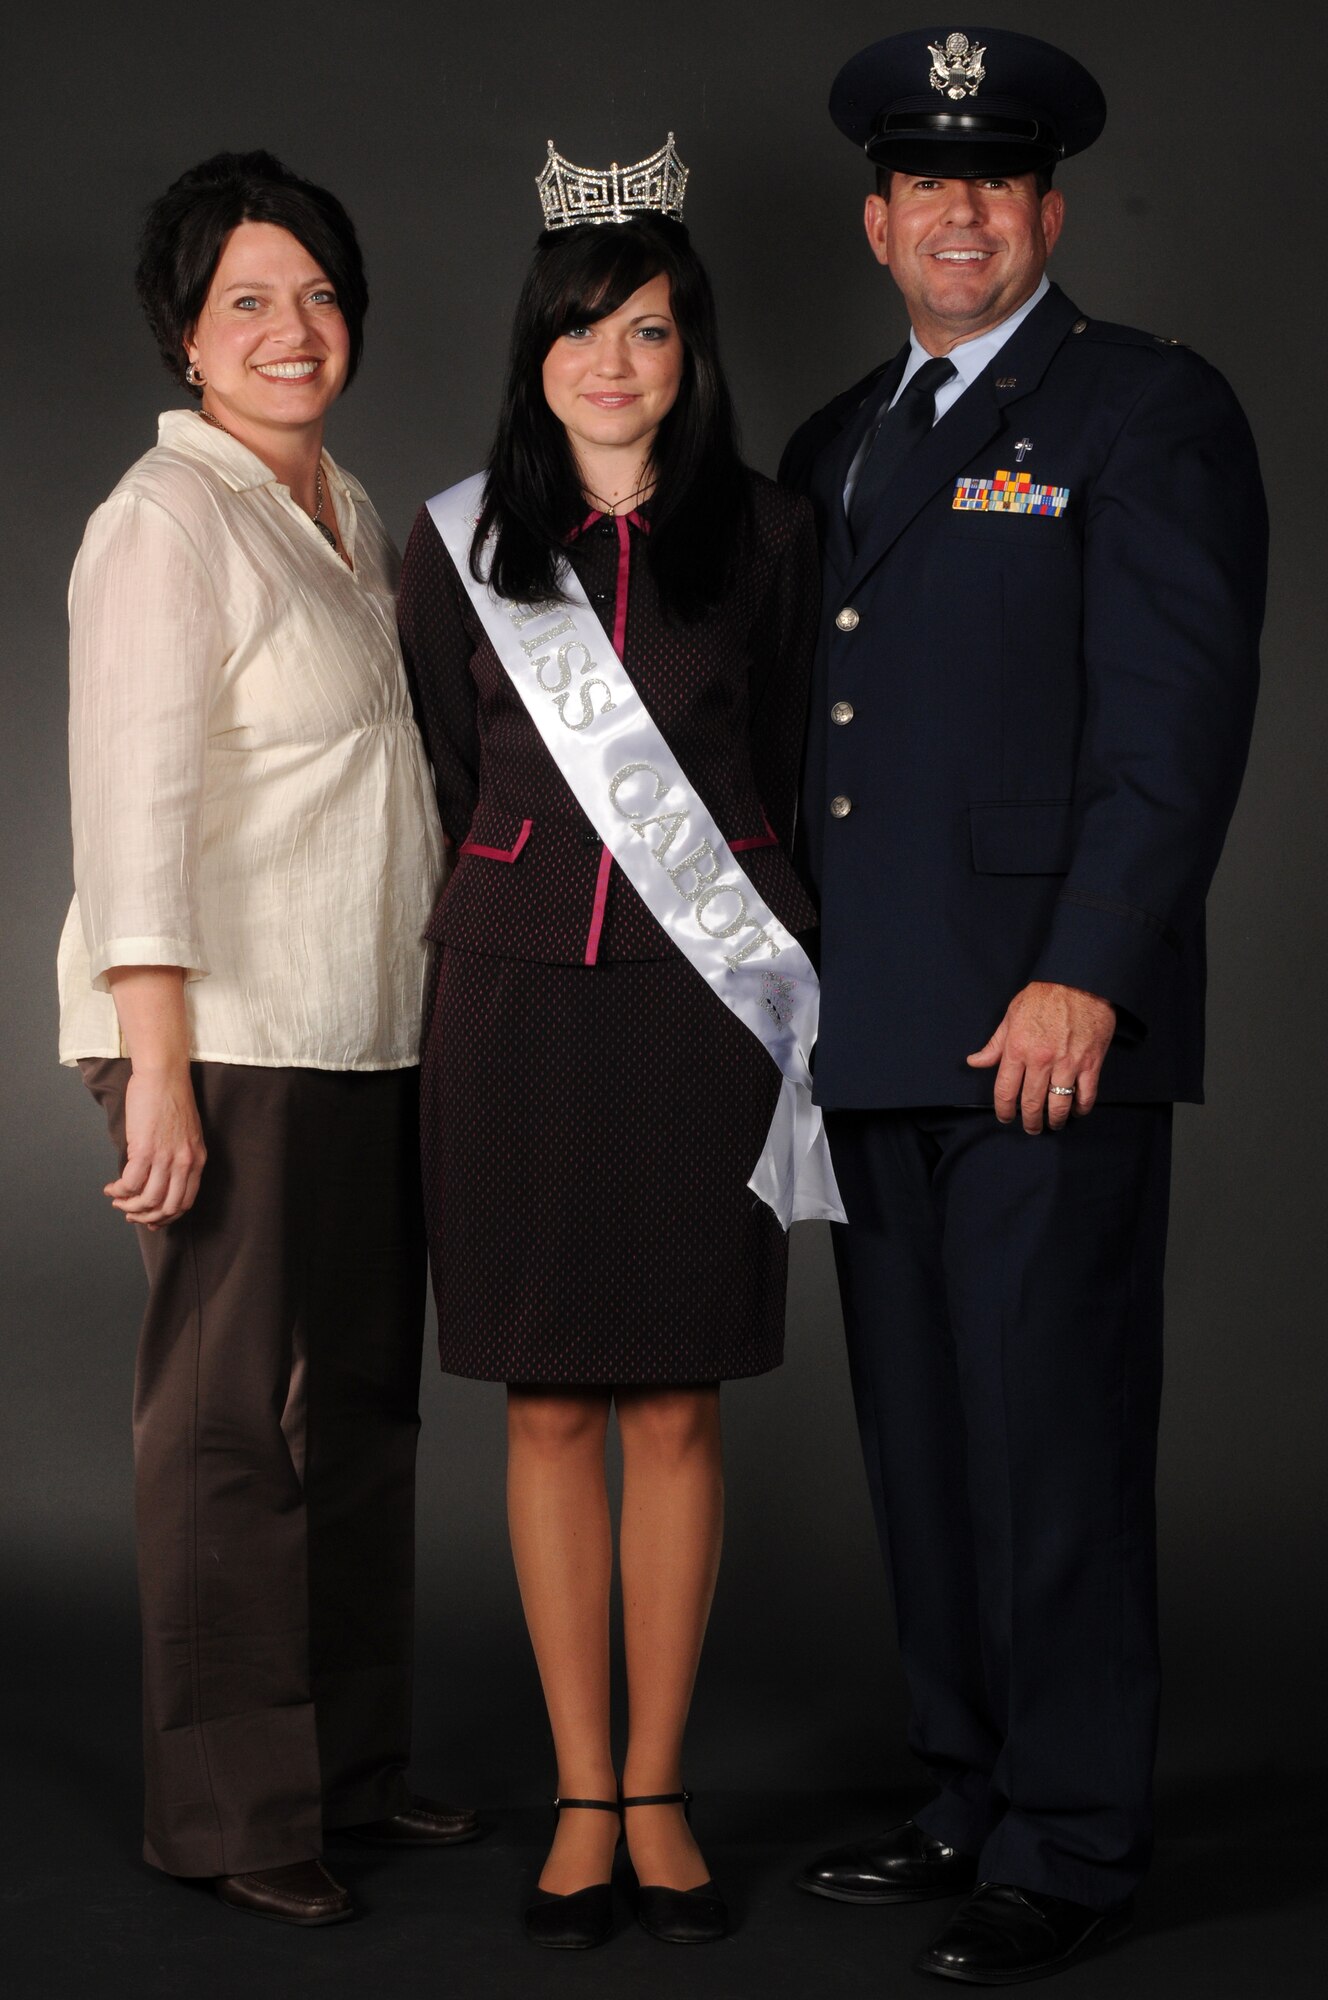 Ally Randall, daughter of Chaplain (Capt.) Sean Randall and Sandra Randall, was crowned Miss Cabot in her second year competing. Her confidence and ambitions are greatly influenced by her parents and the values held by an Air Force family. (U.S. Air Force photo by Airman 1st Class Lausanne Pacheco)